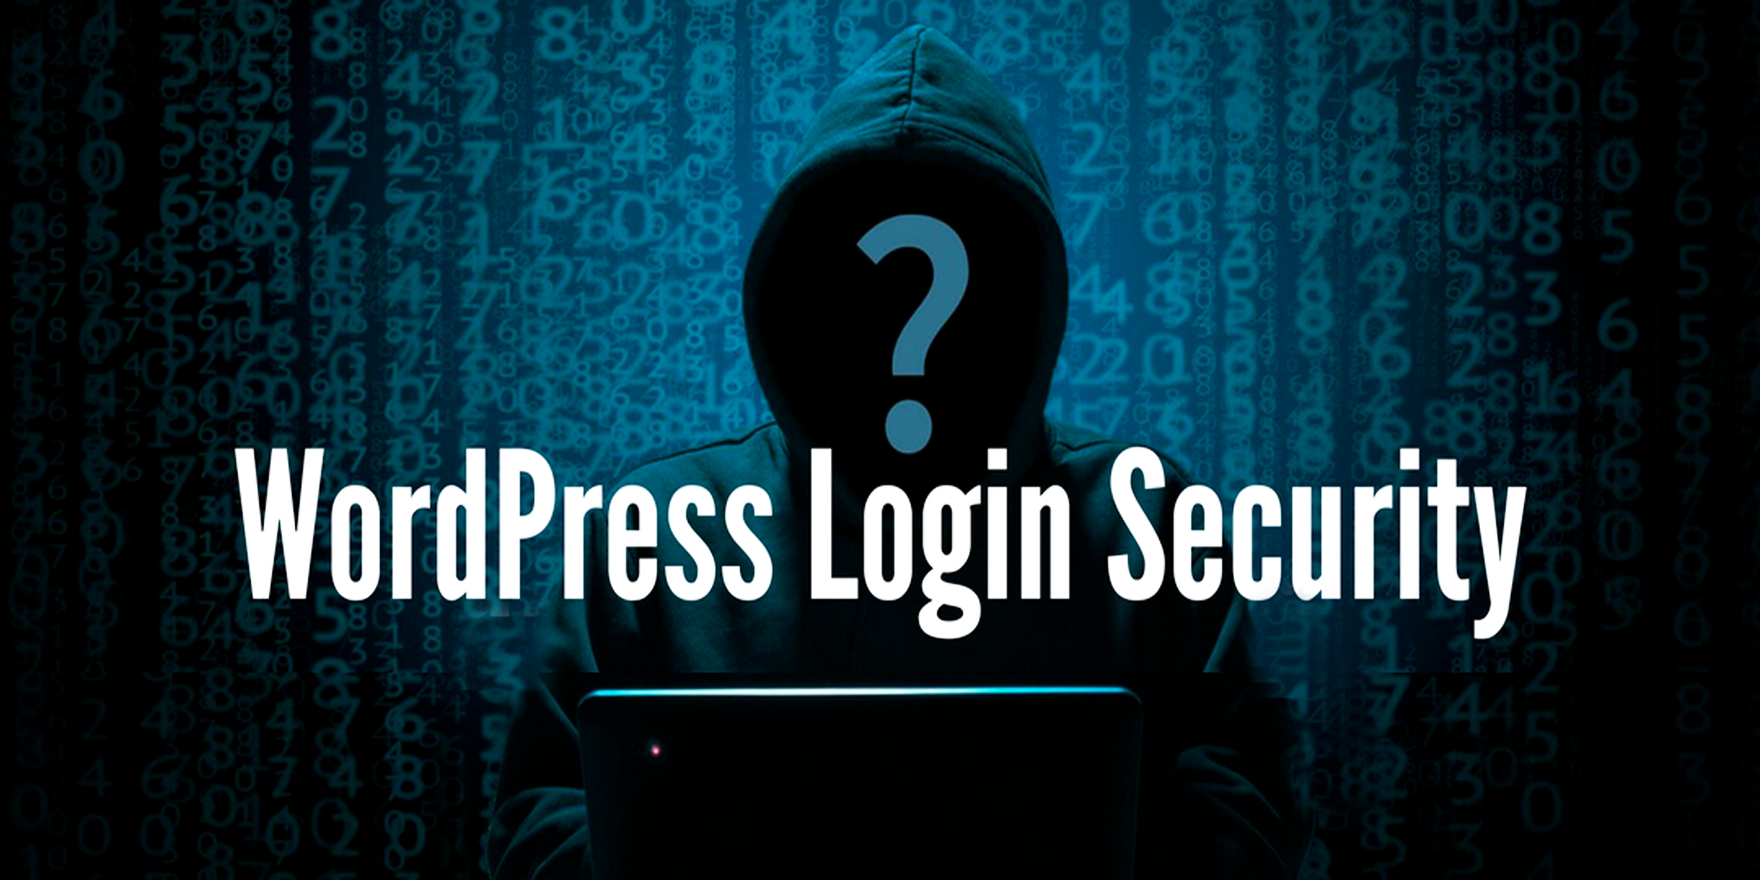 Learn more about WordPress Tight Login Security